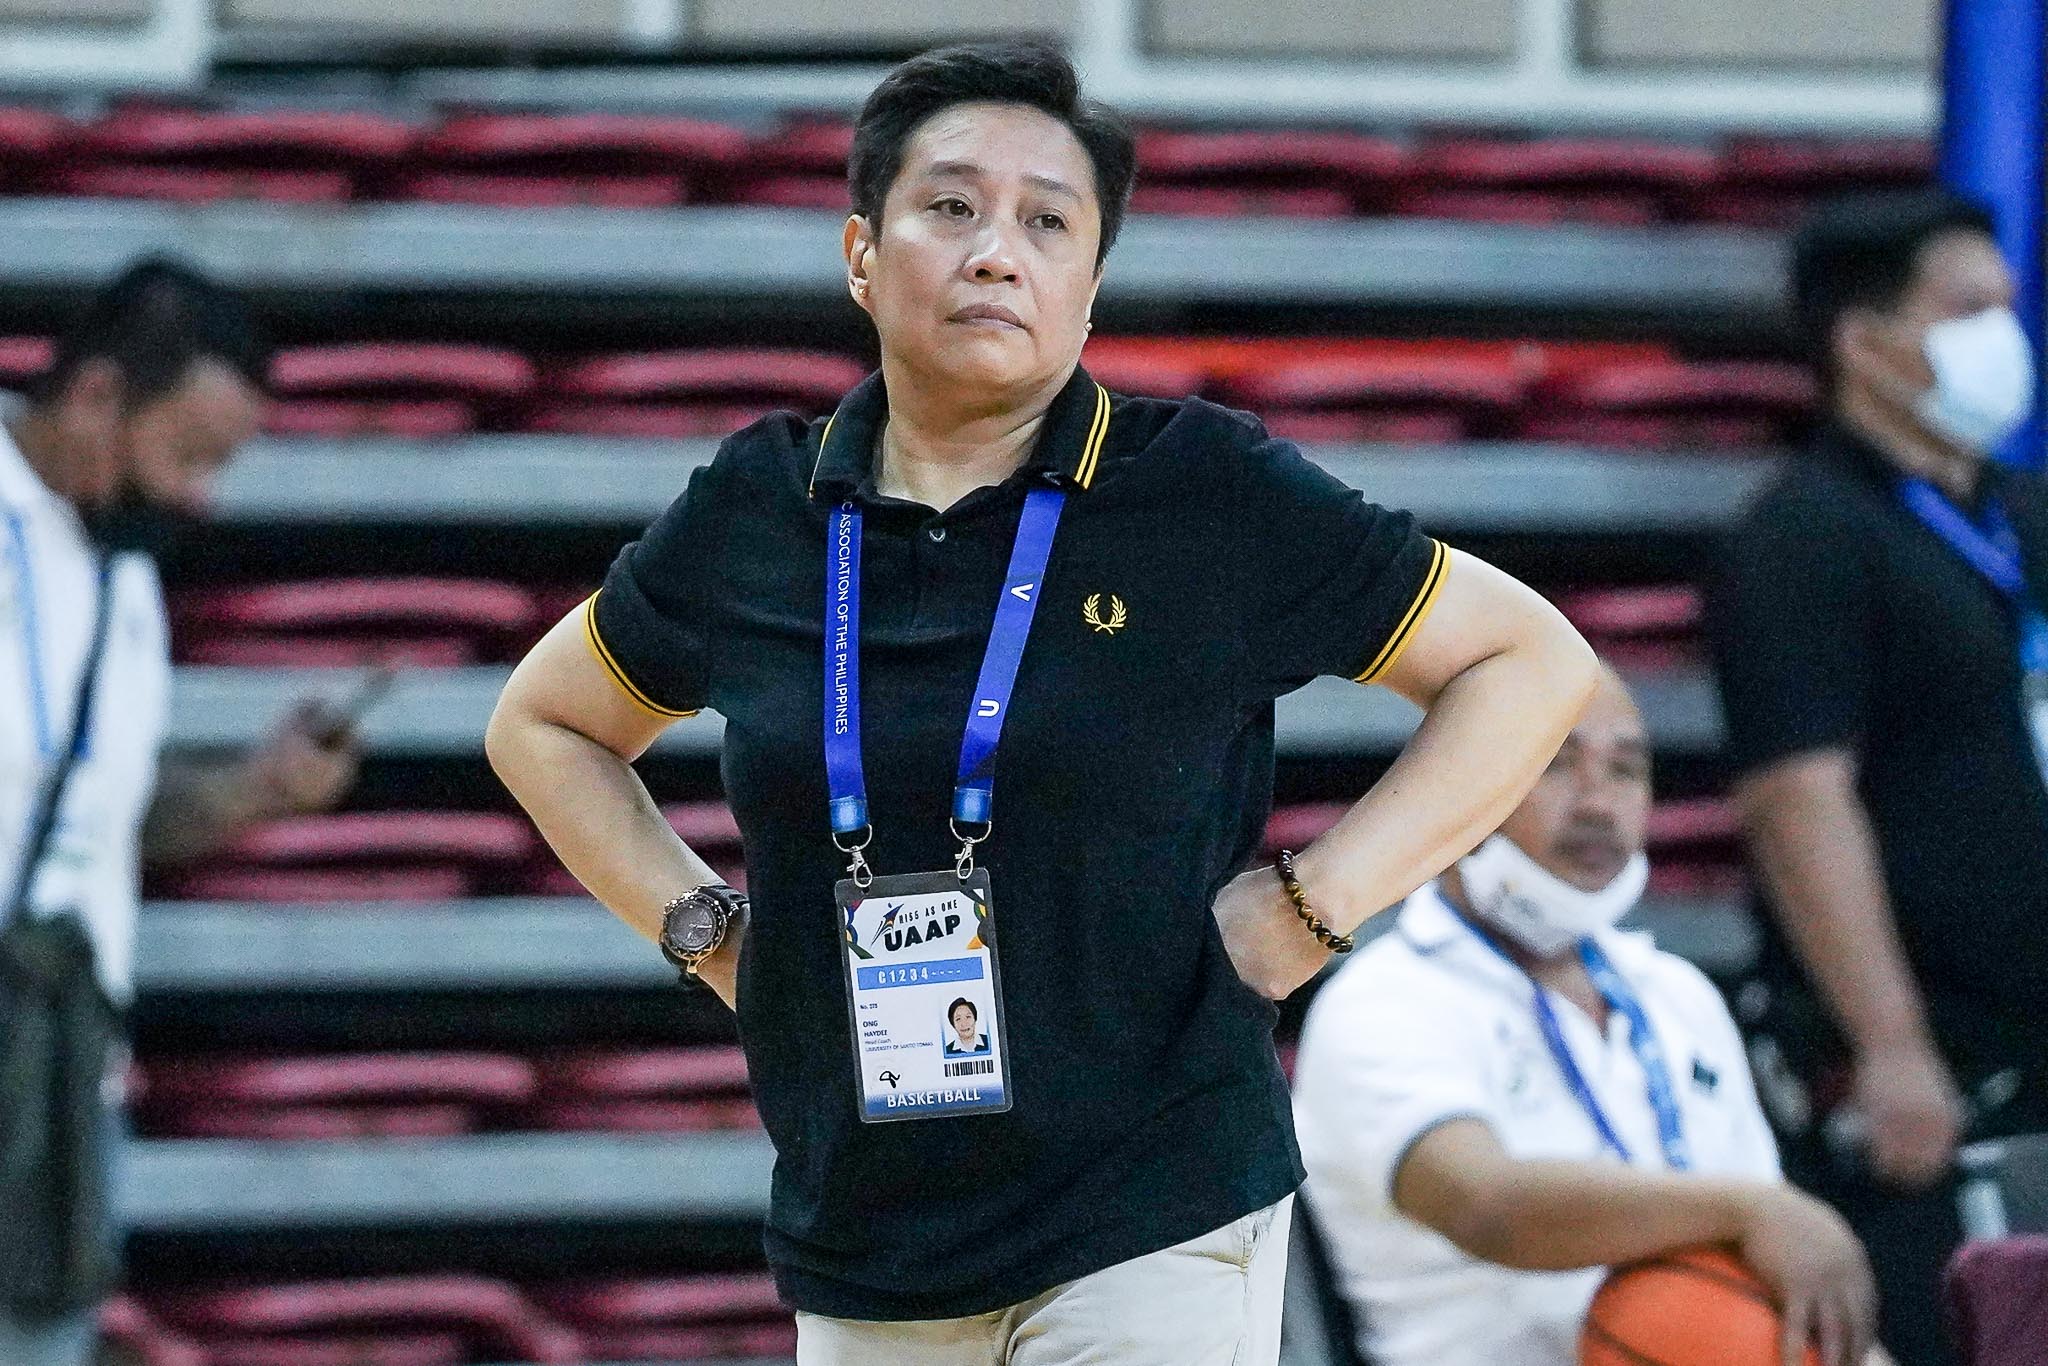 UAAP-WBB-Coach-Haydee-Ong-UST Dimaunahan not minding who wins La Salle-UST series: 'We just play our game' Basketball News NU UAAP  - philippine sports news